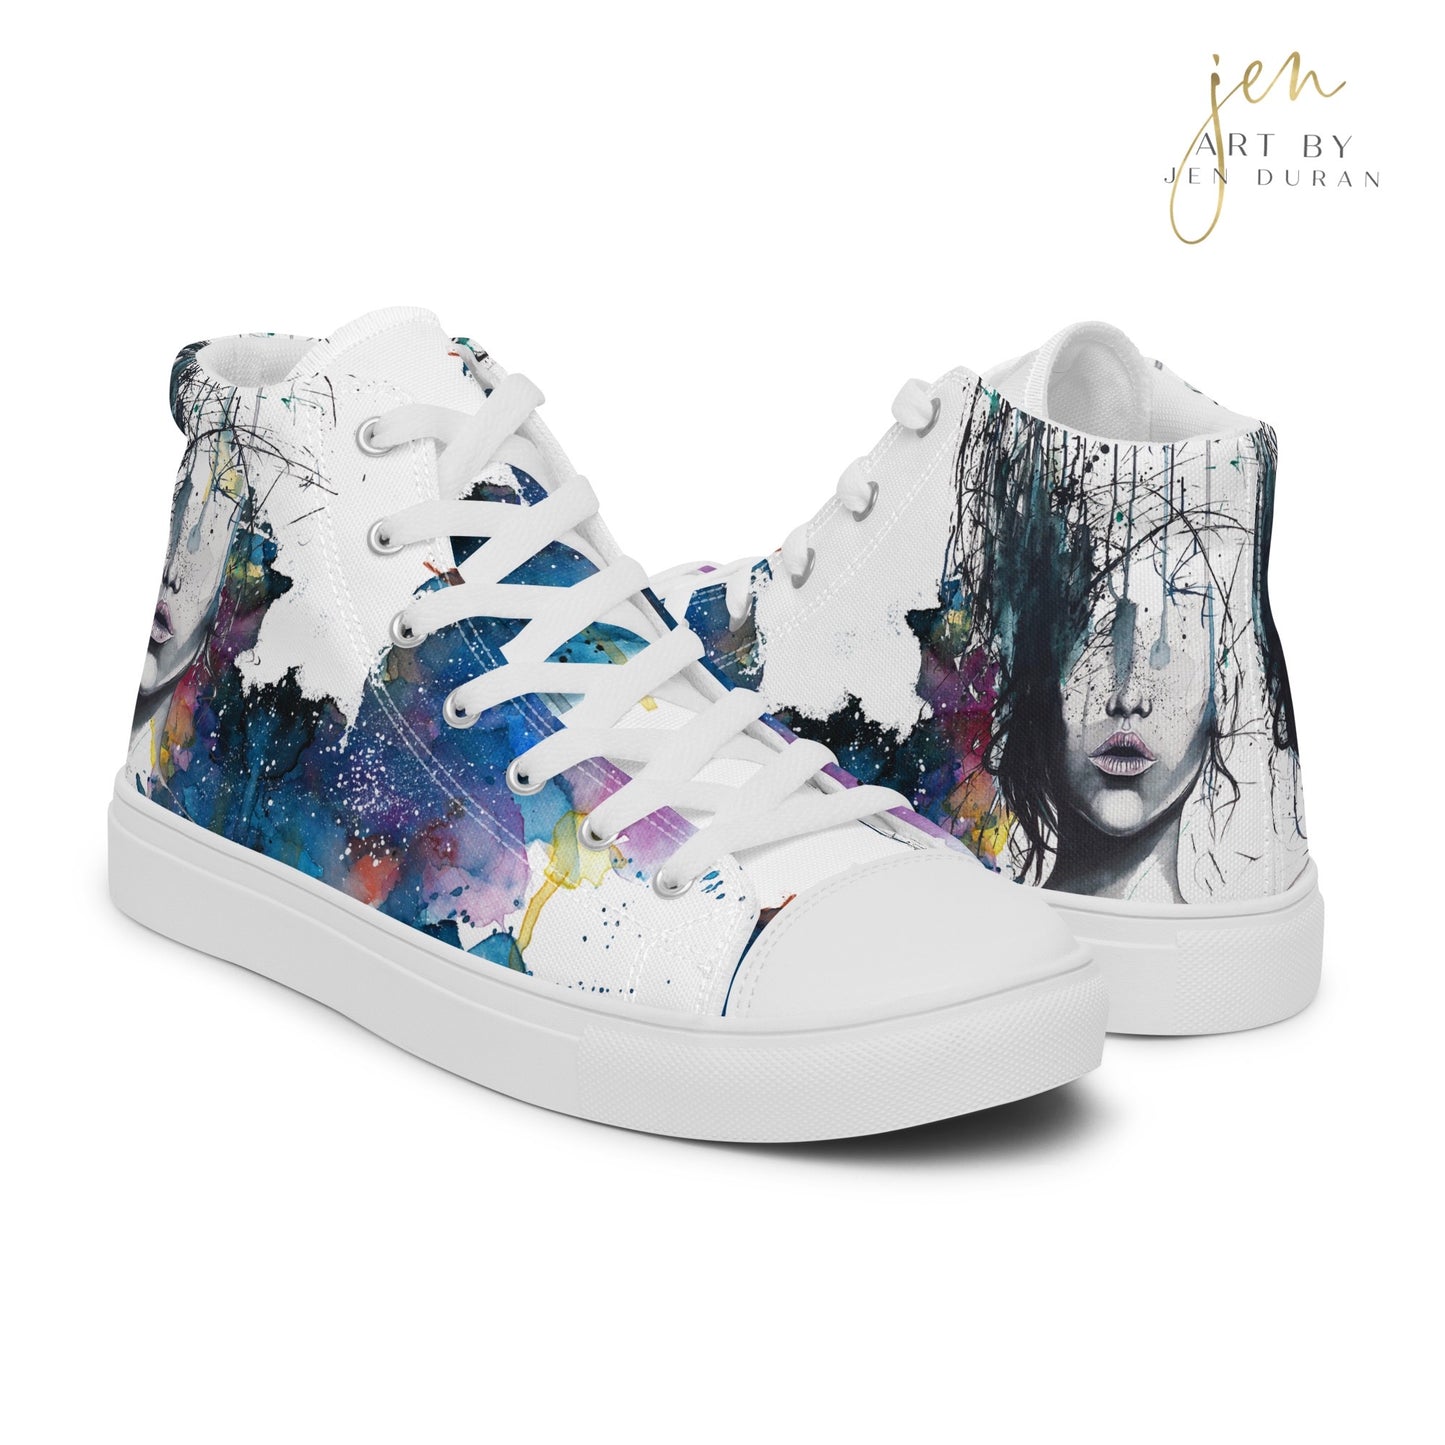 Men’s high top canvas shoes | High Top Sneakers | Consumed By Chaos